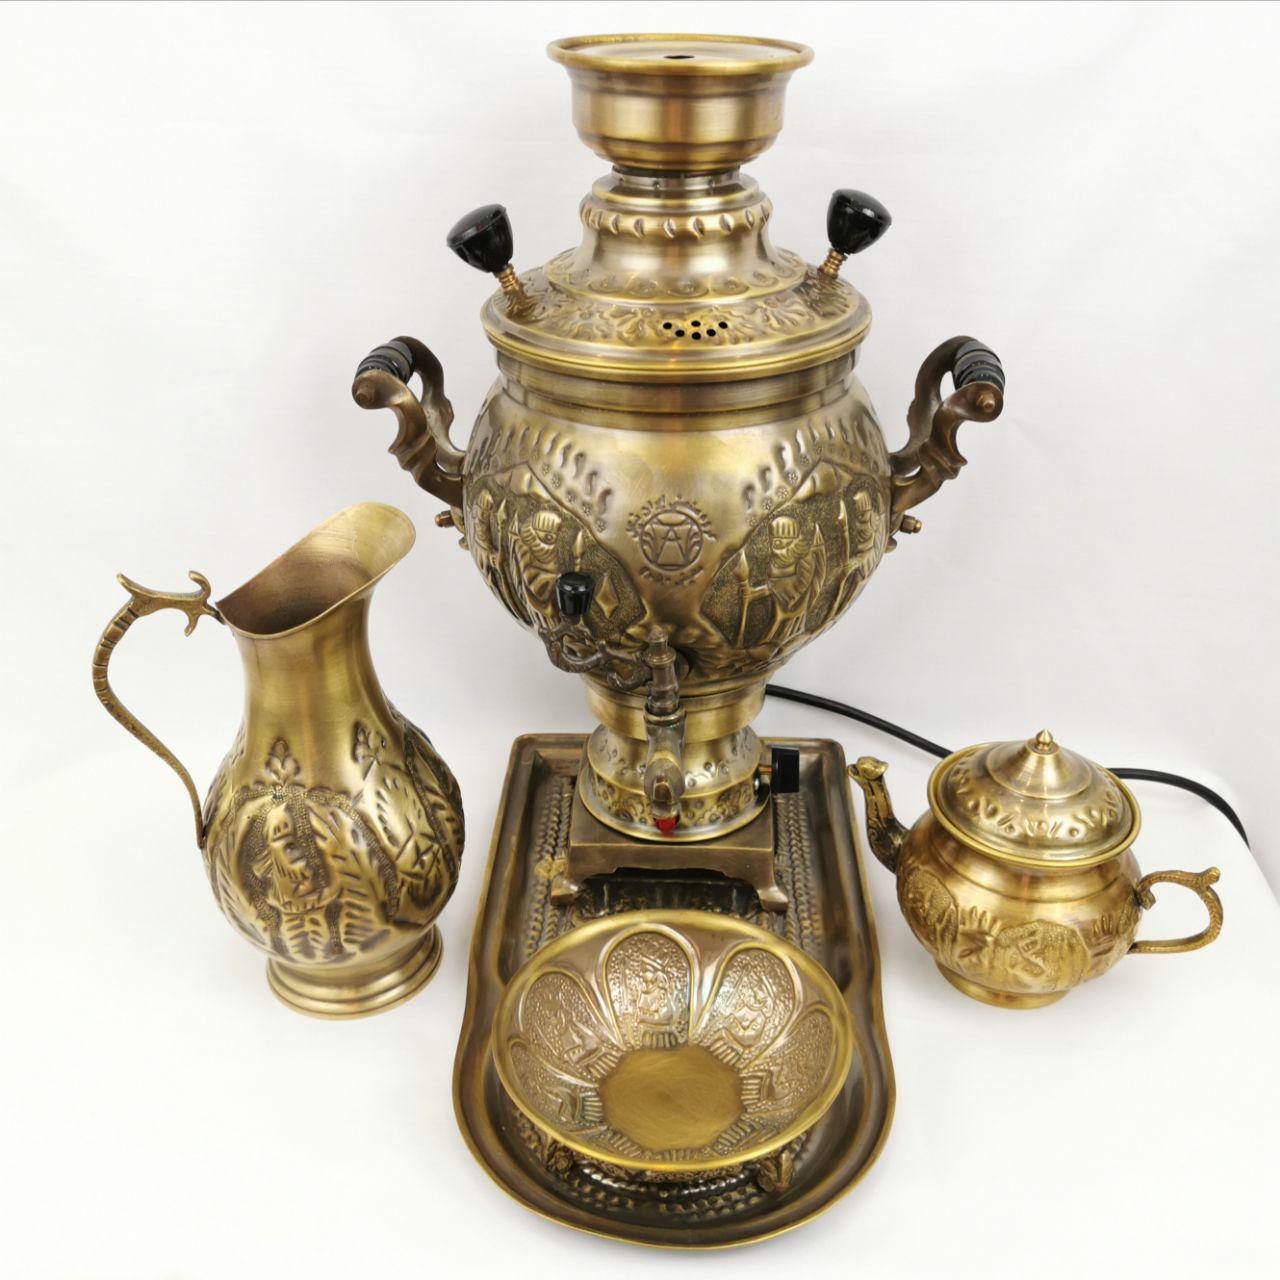 https://www.persiscollection.com/wp-content/uploads/2021/08/PERSEPOLIS-ELECTRIC-SAMOVAR-SET-4-L-persis-collection-1.jpg